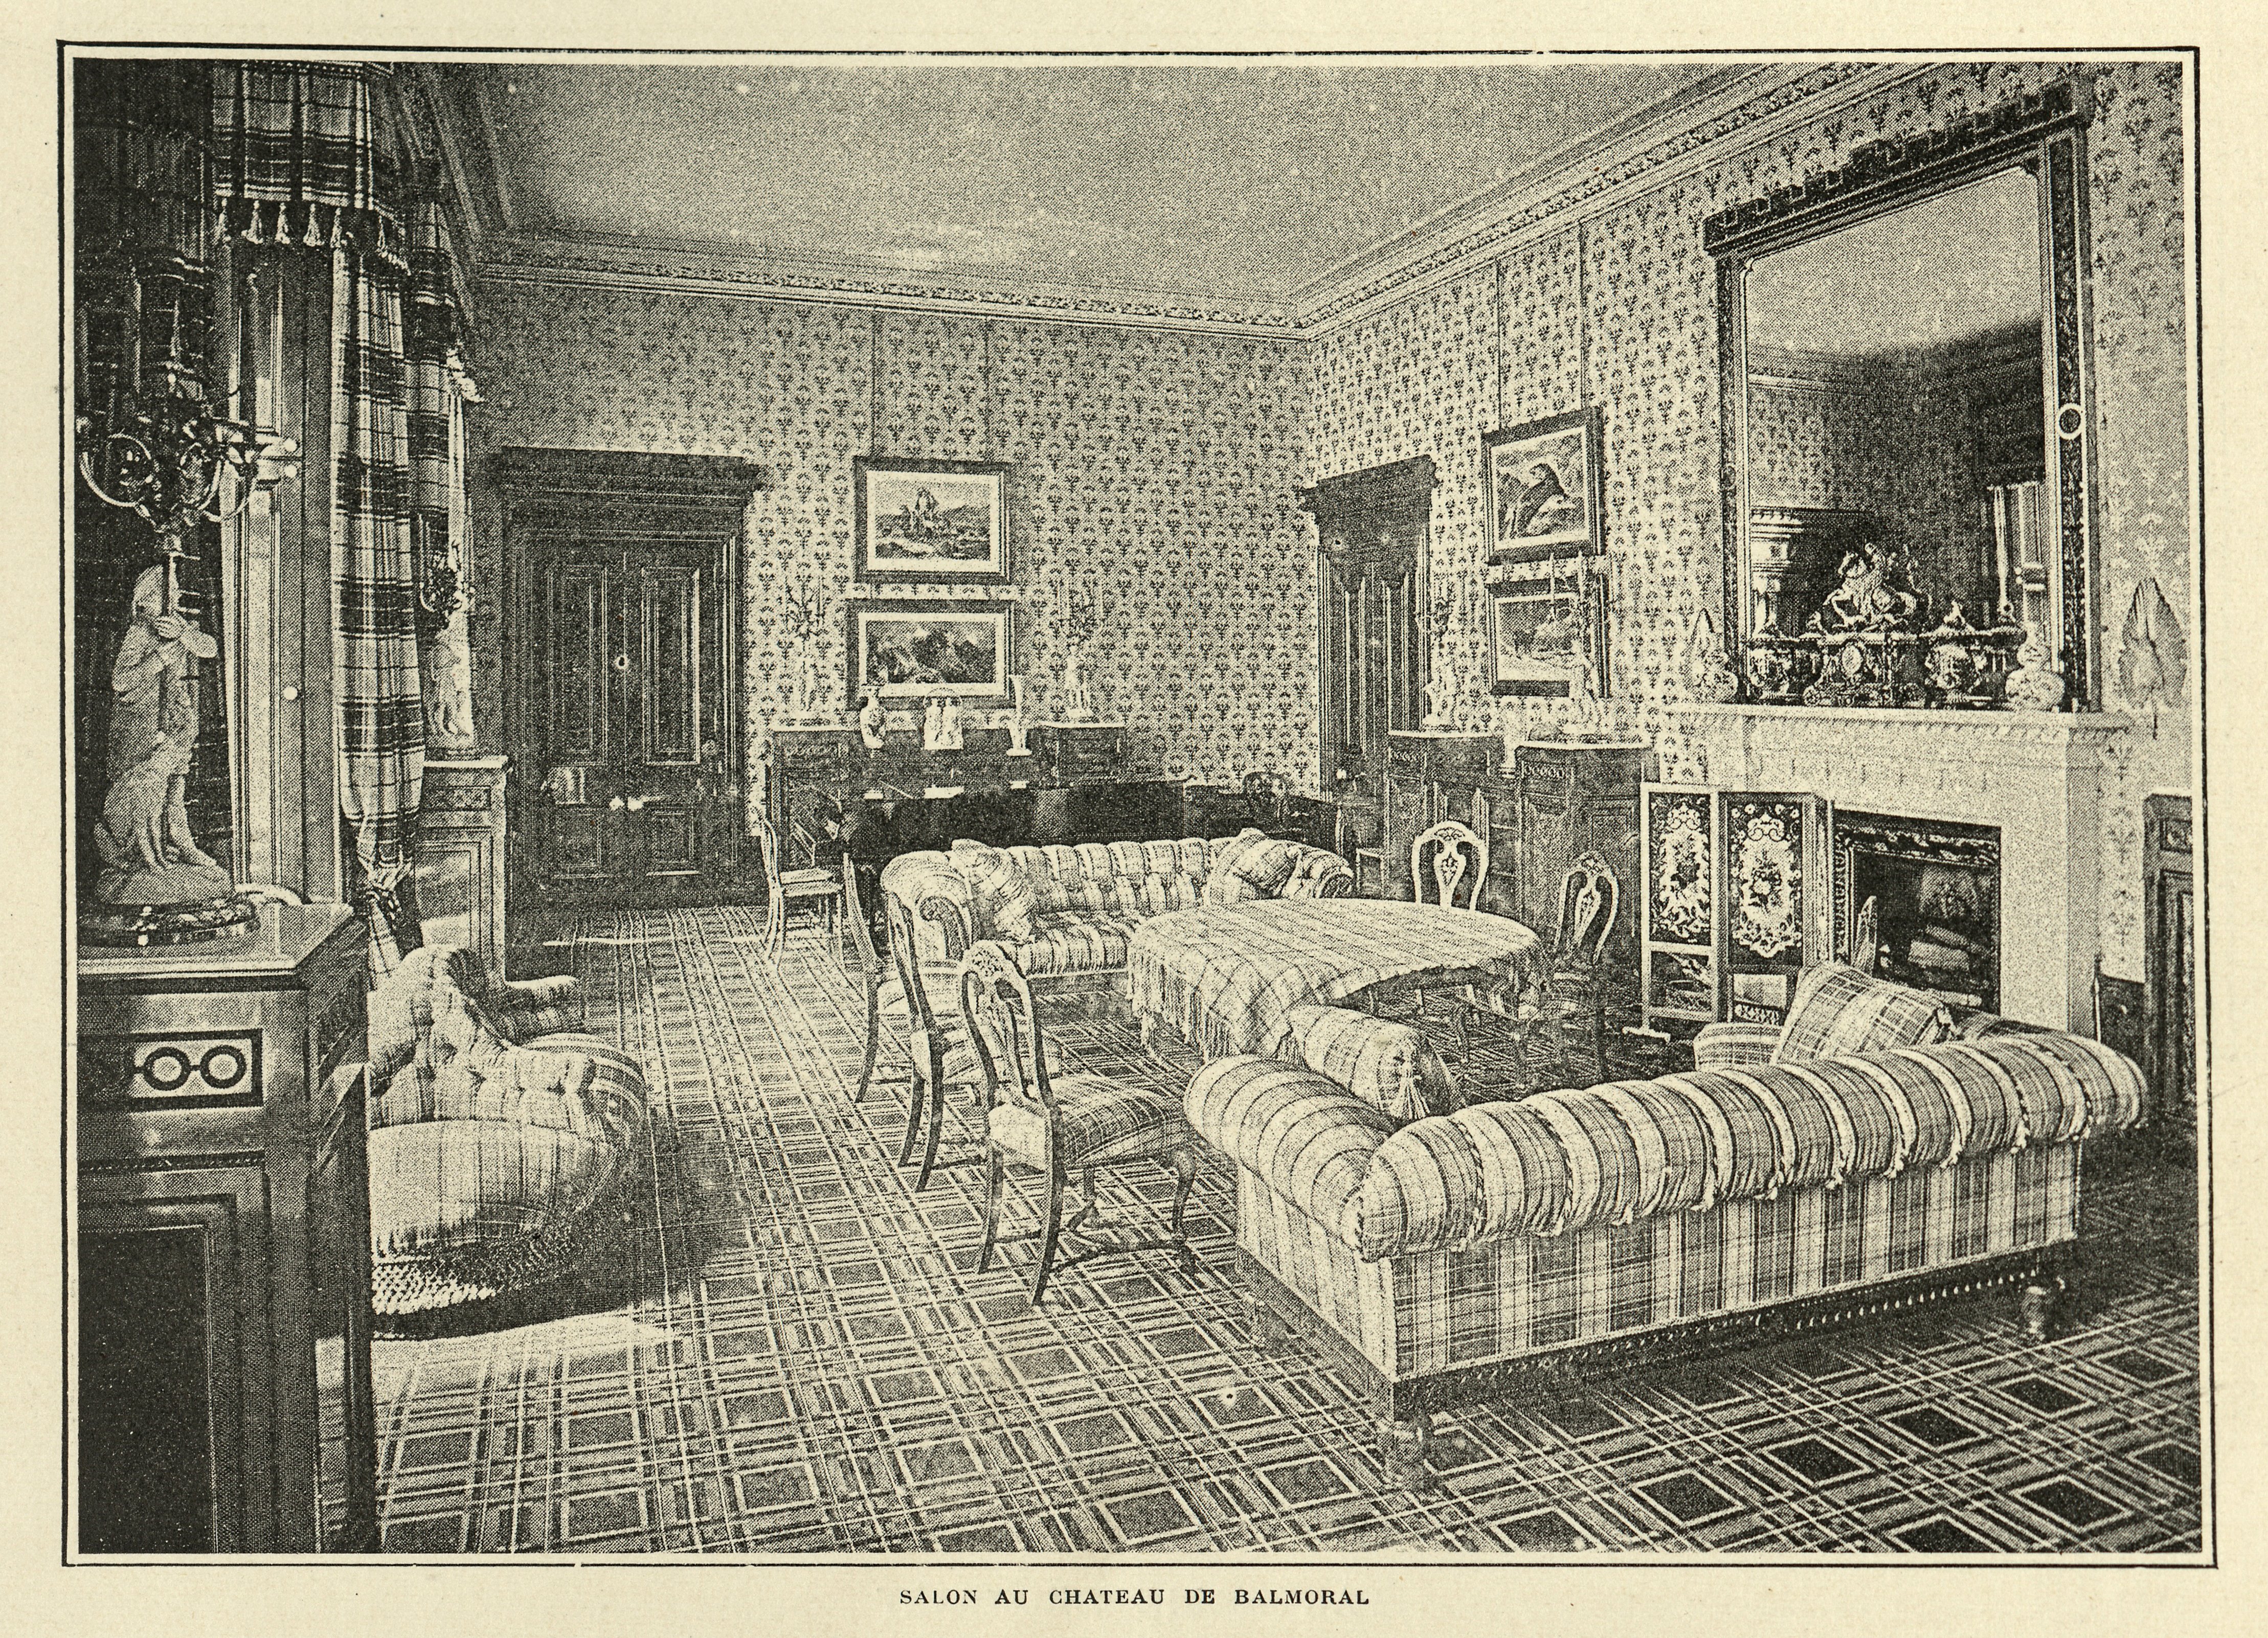 Nineteenth century illustration of the Drawing Room at Balmoral Castle | Source: Getty Images